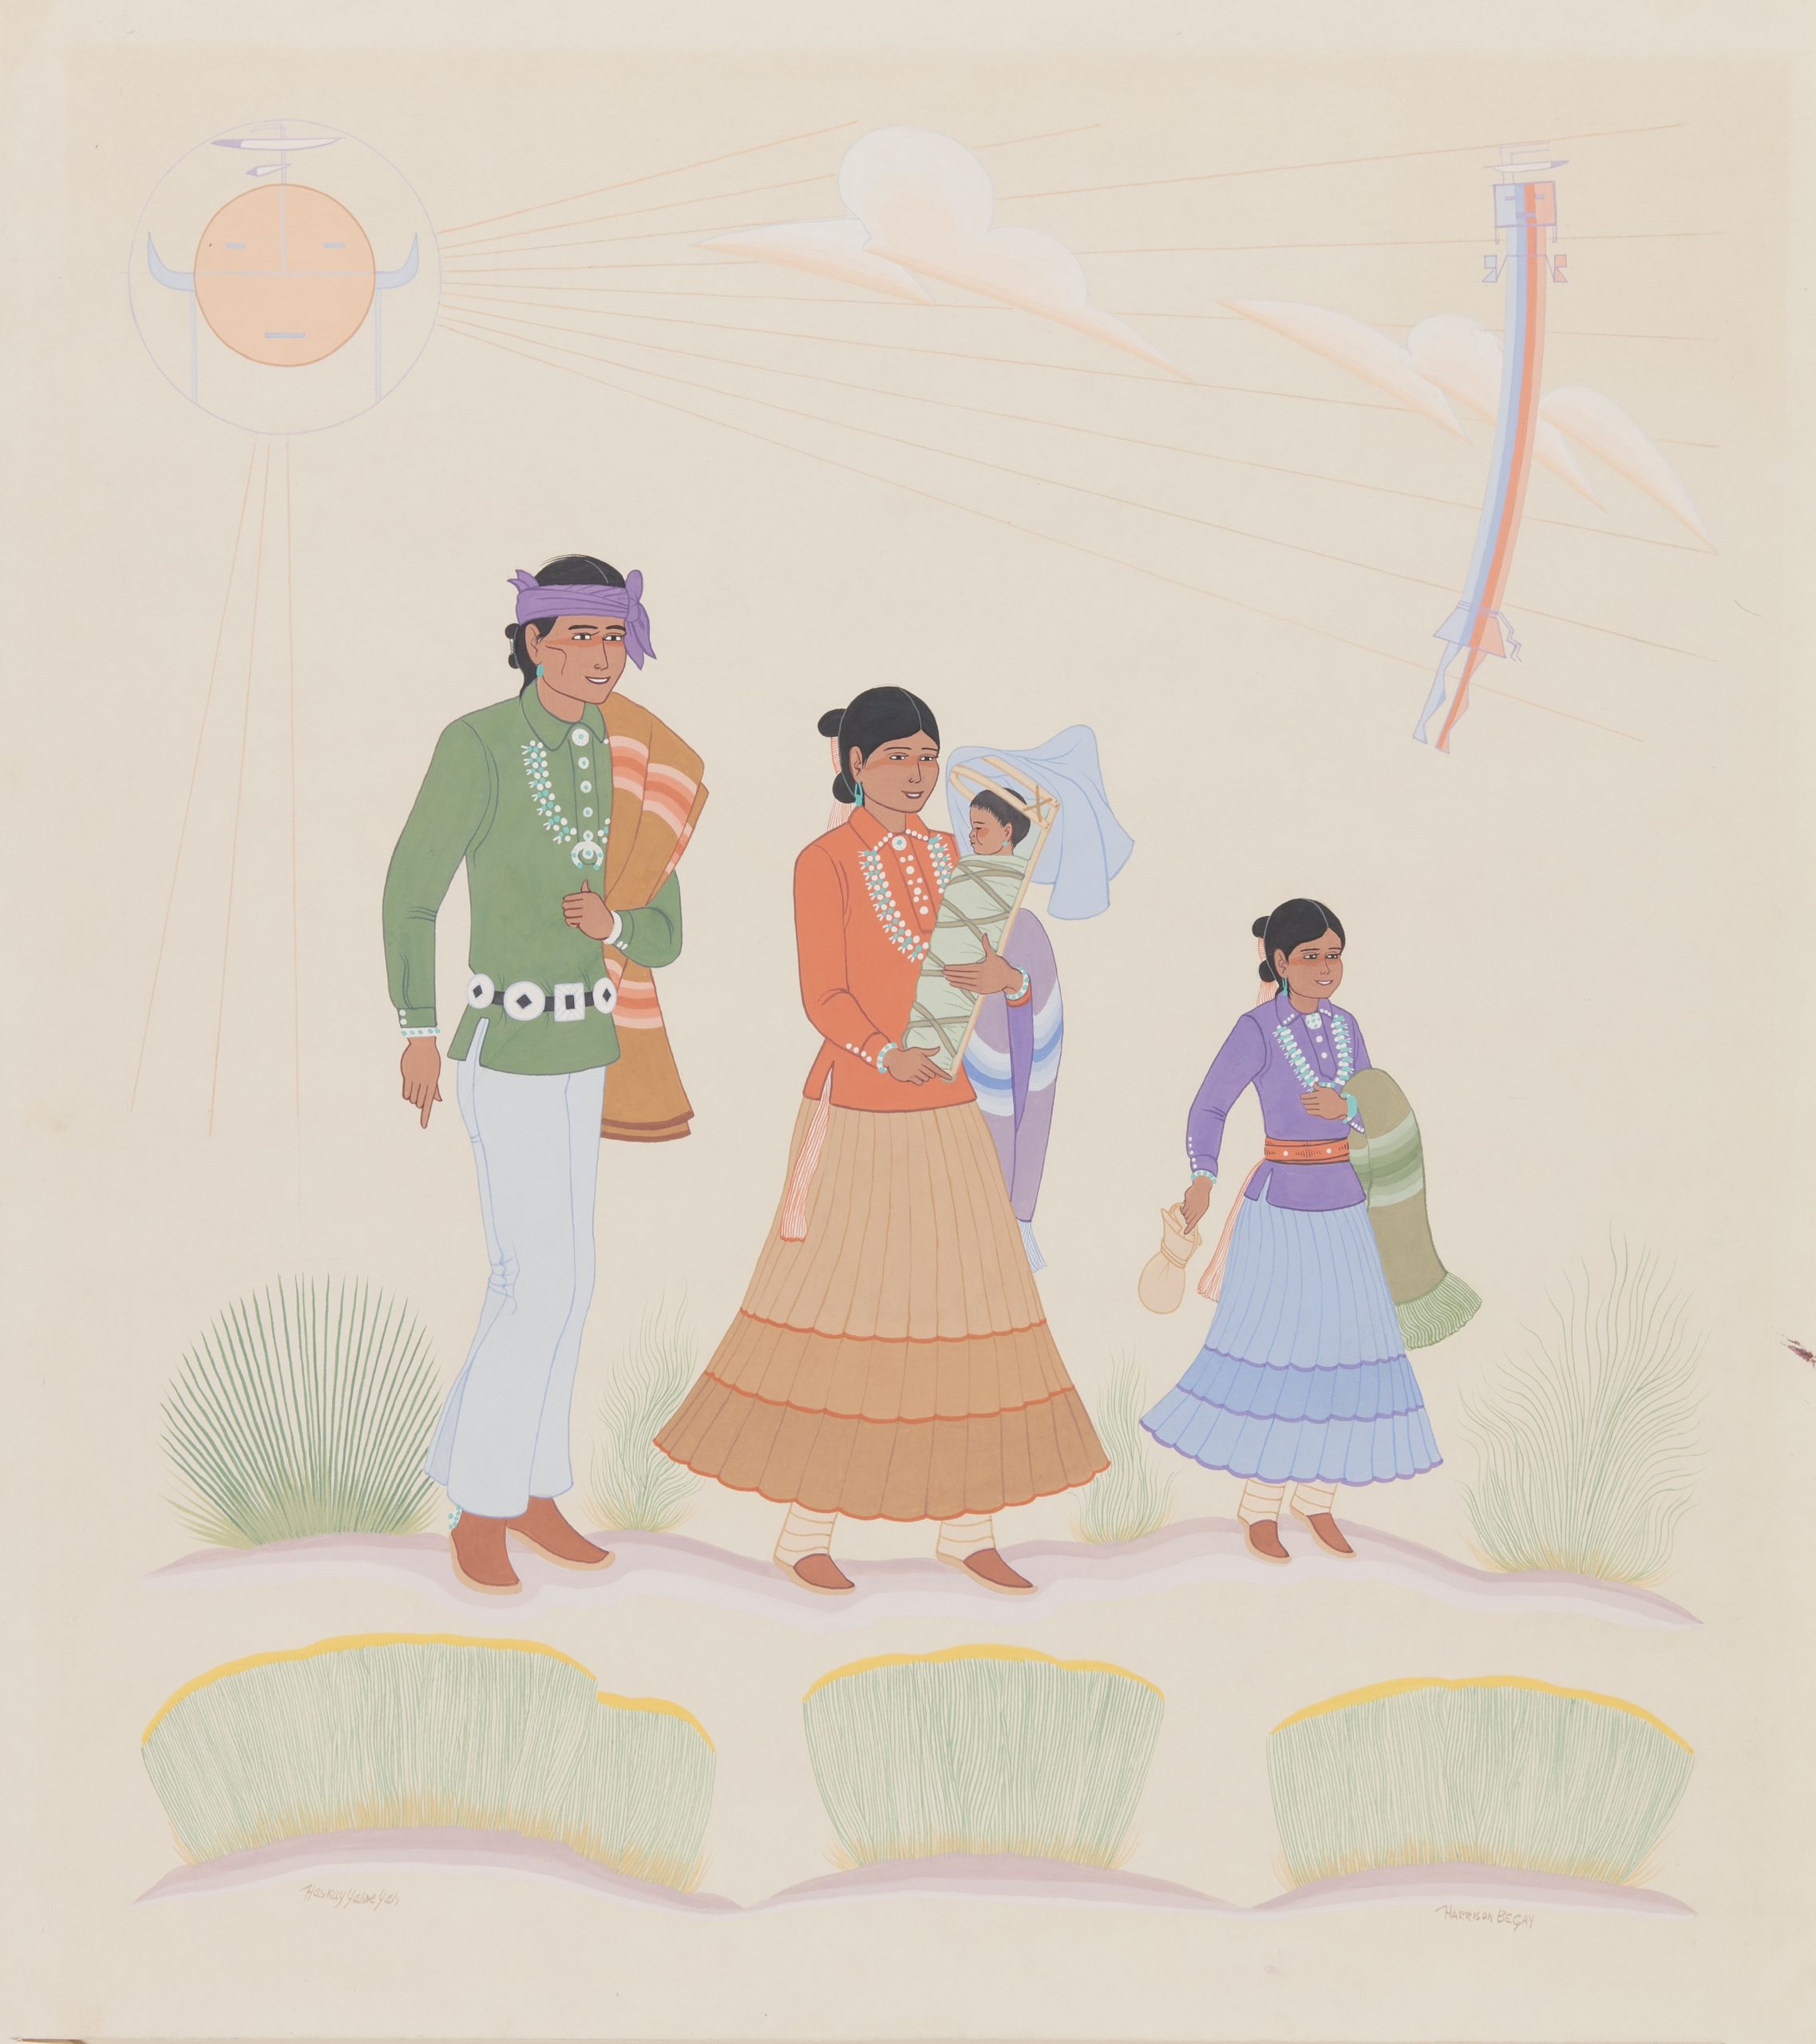 Harrison Begay (Haskay Yahne Yah). Untitled, c. 1960. Illustration board, casein paint. 19 ½ x 17 ½ in. SAR.1985-20-95. Photograph by Addison Doty. Copyright 2019 School for Advanced Research.